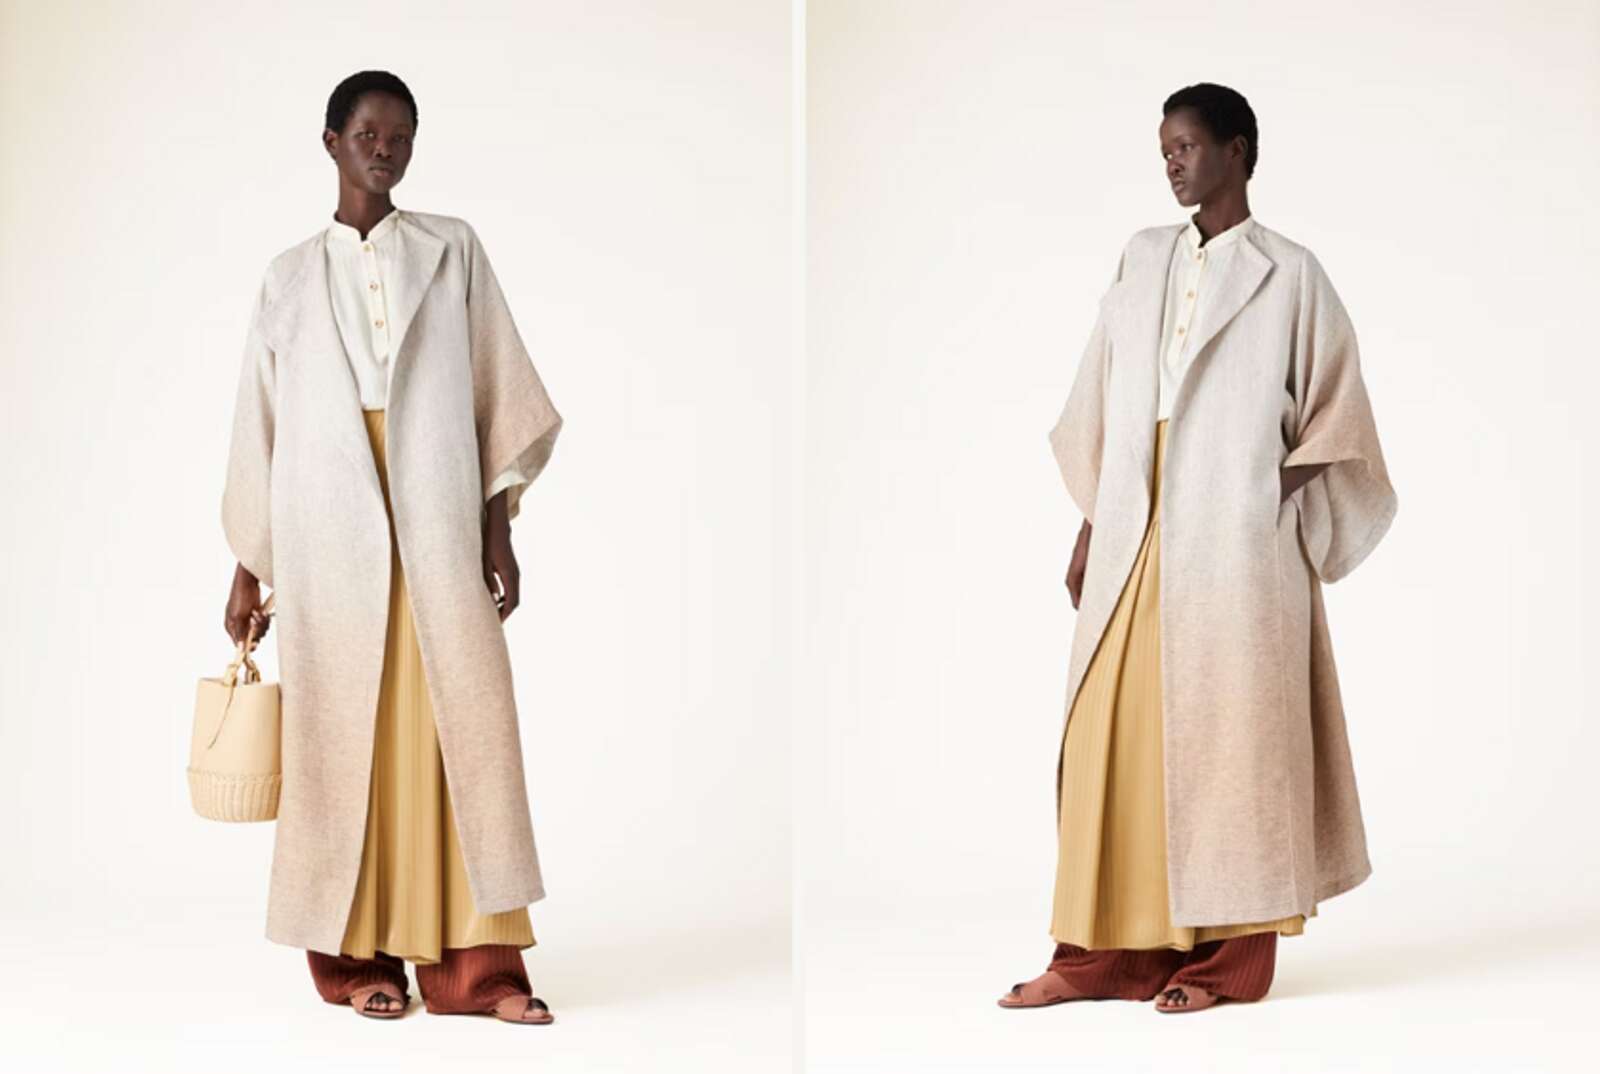 dressing ideas for ramadan 2024: here are a few 'inspos' for women's fashion